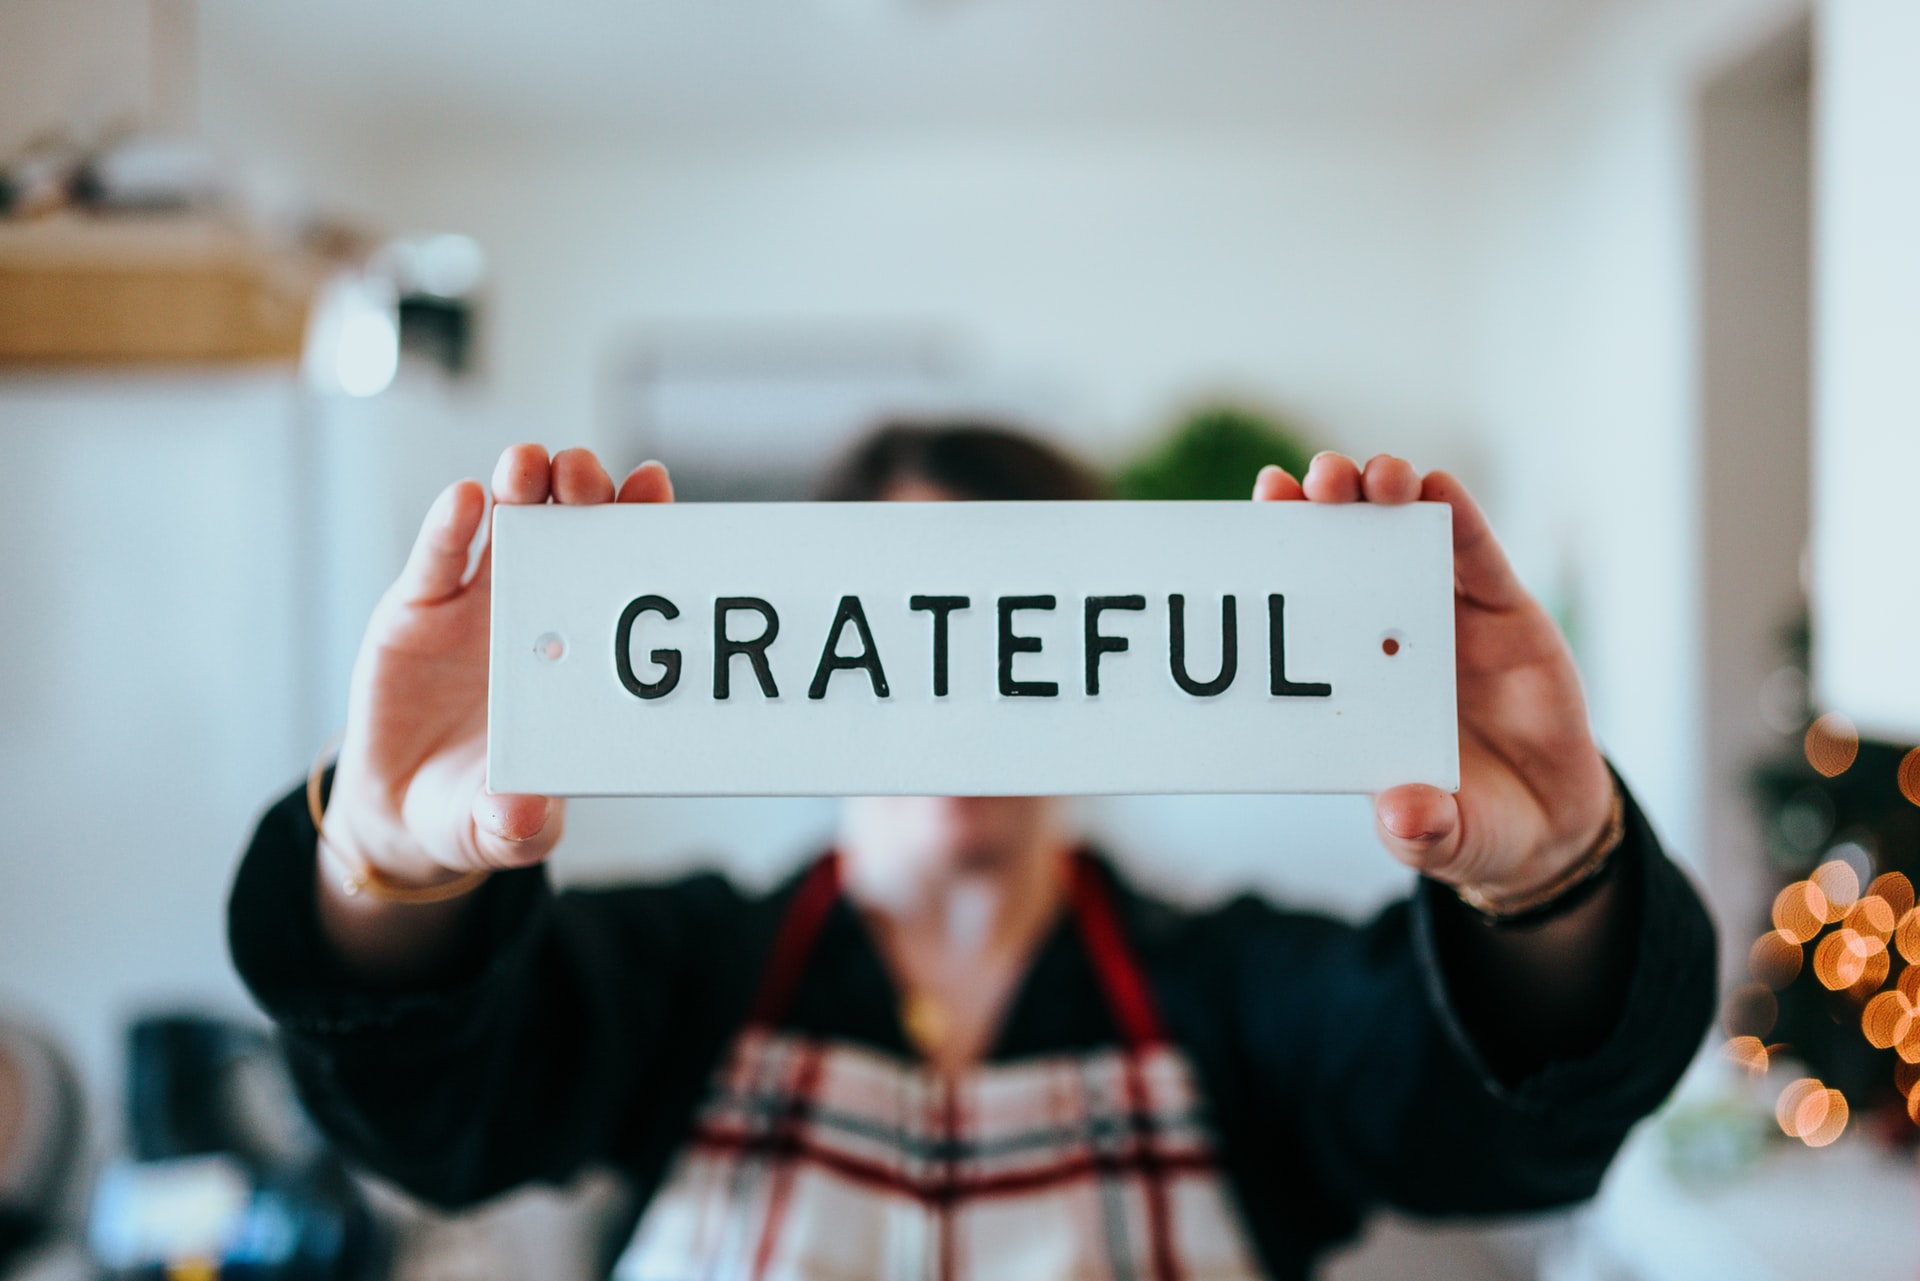 How To Practice Gratitude As A Child